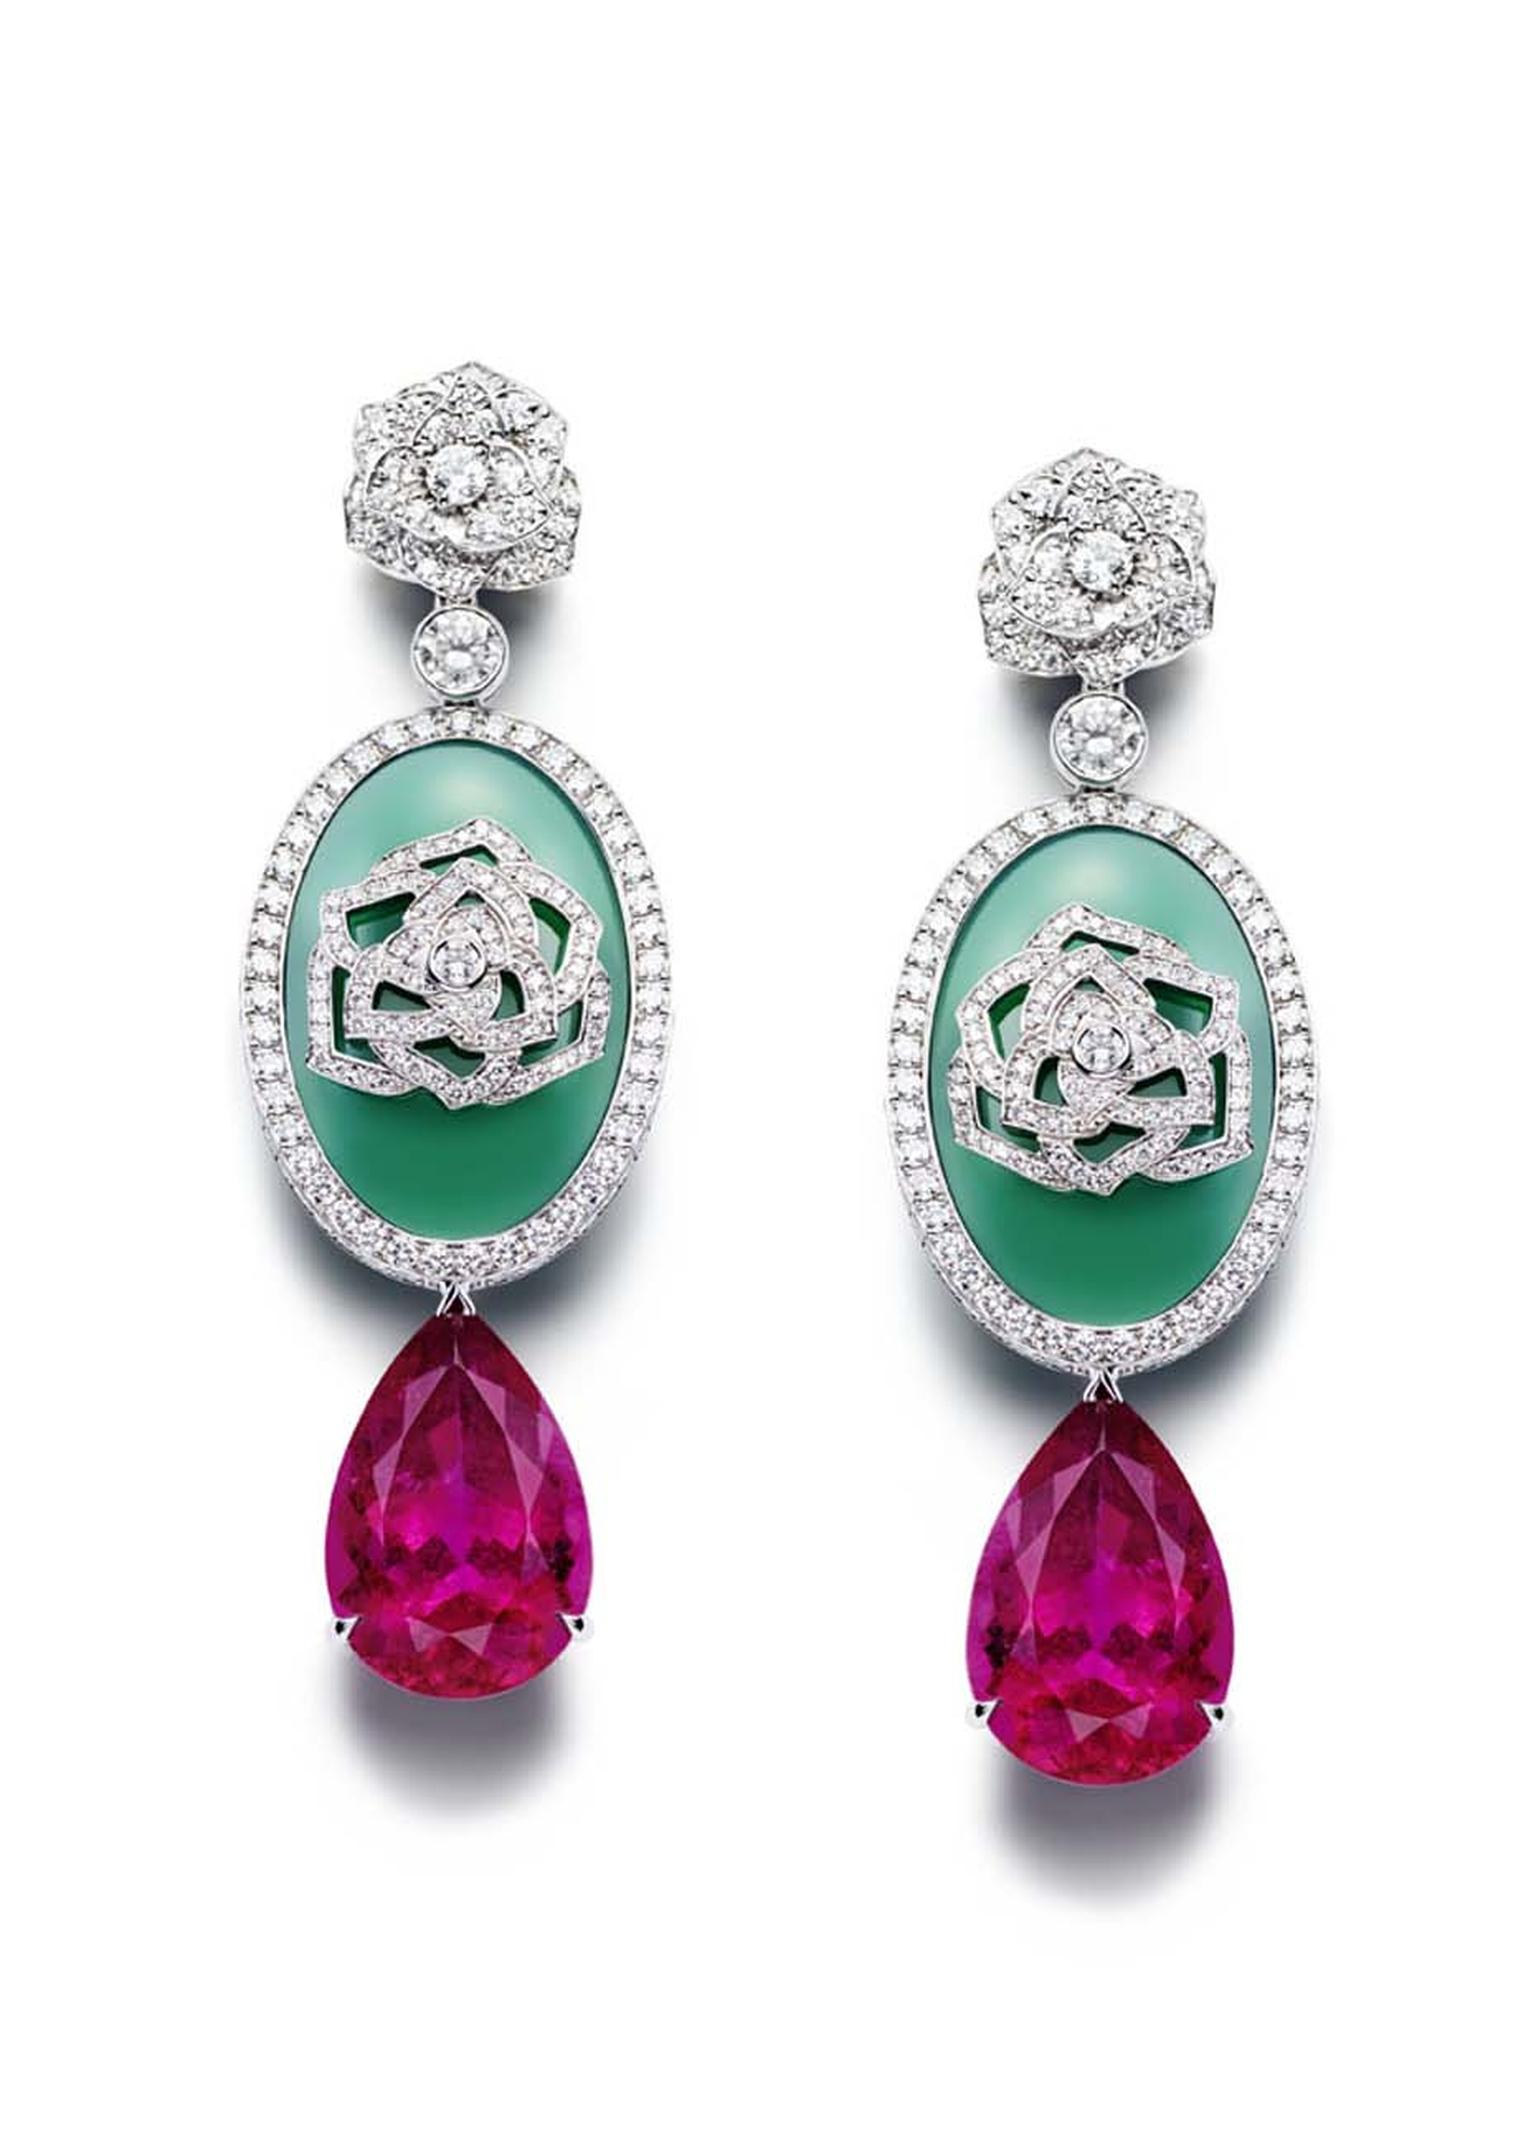 Piaget Rose Passion earrings in white gold, with pear shaped rubellites and chrysoprase surrounded by diamonds